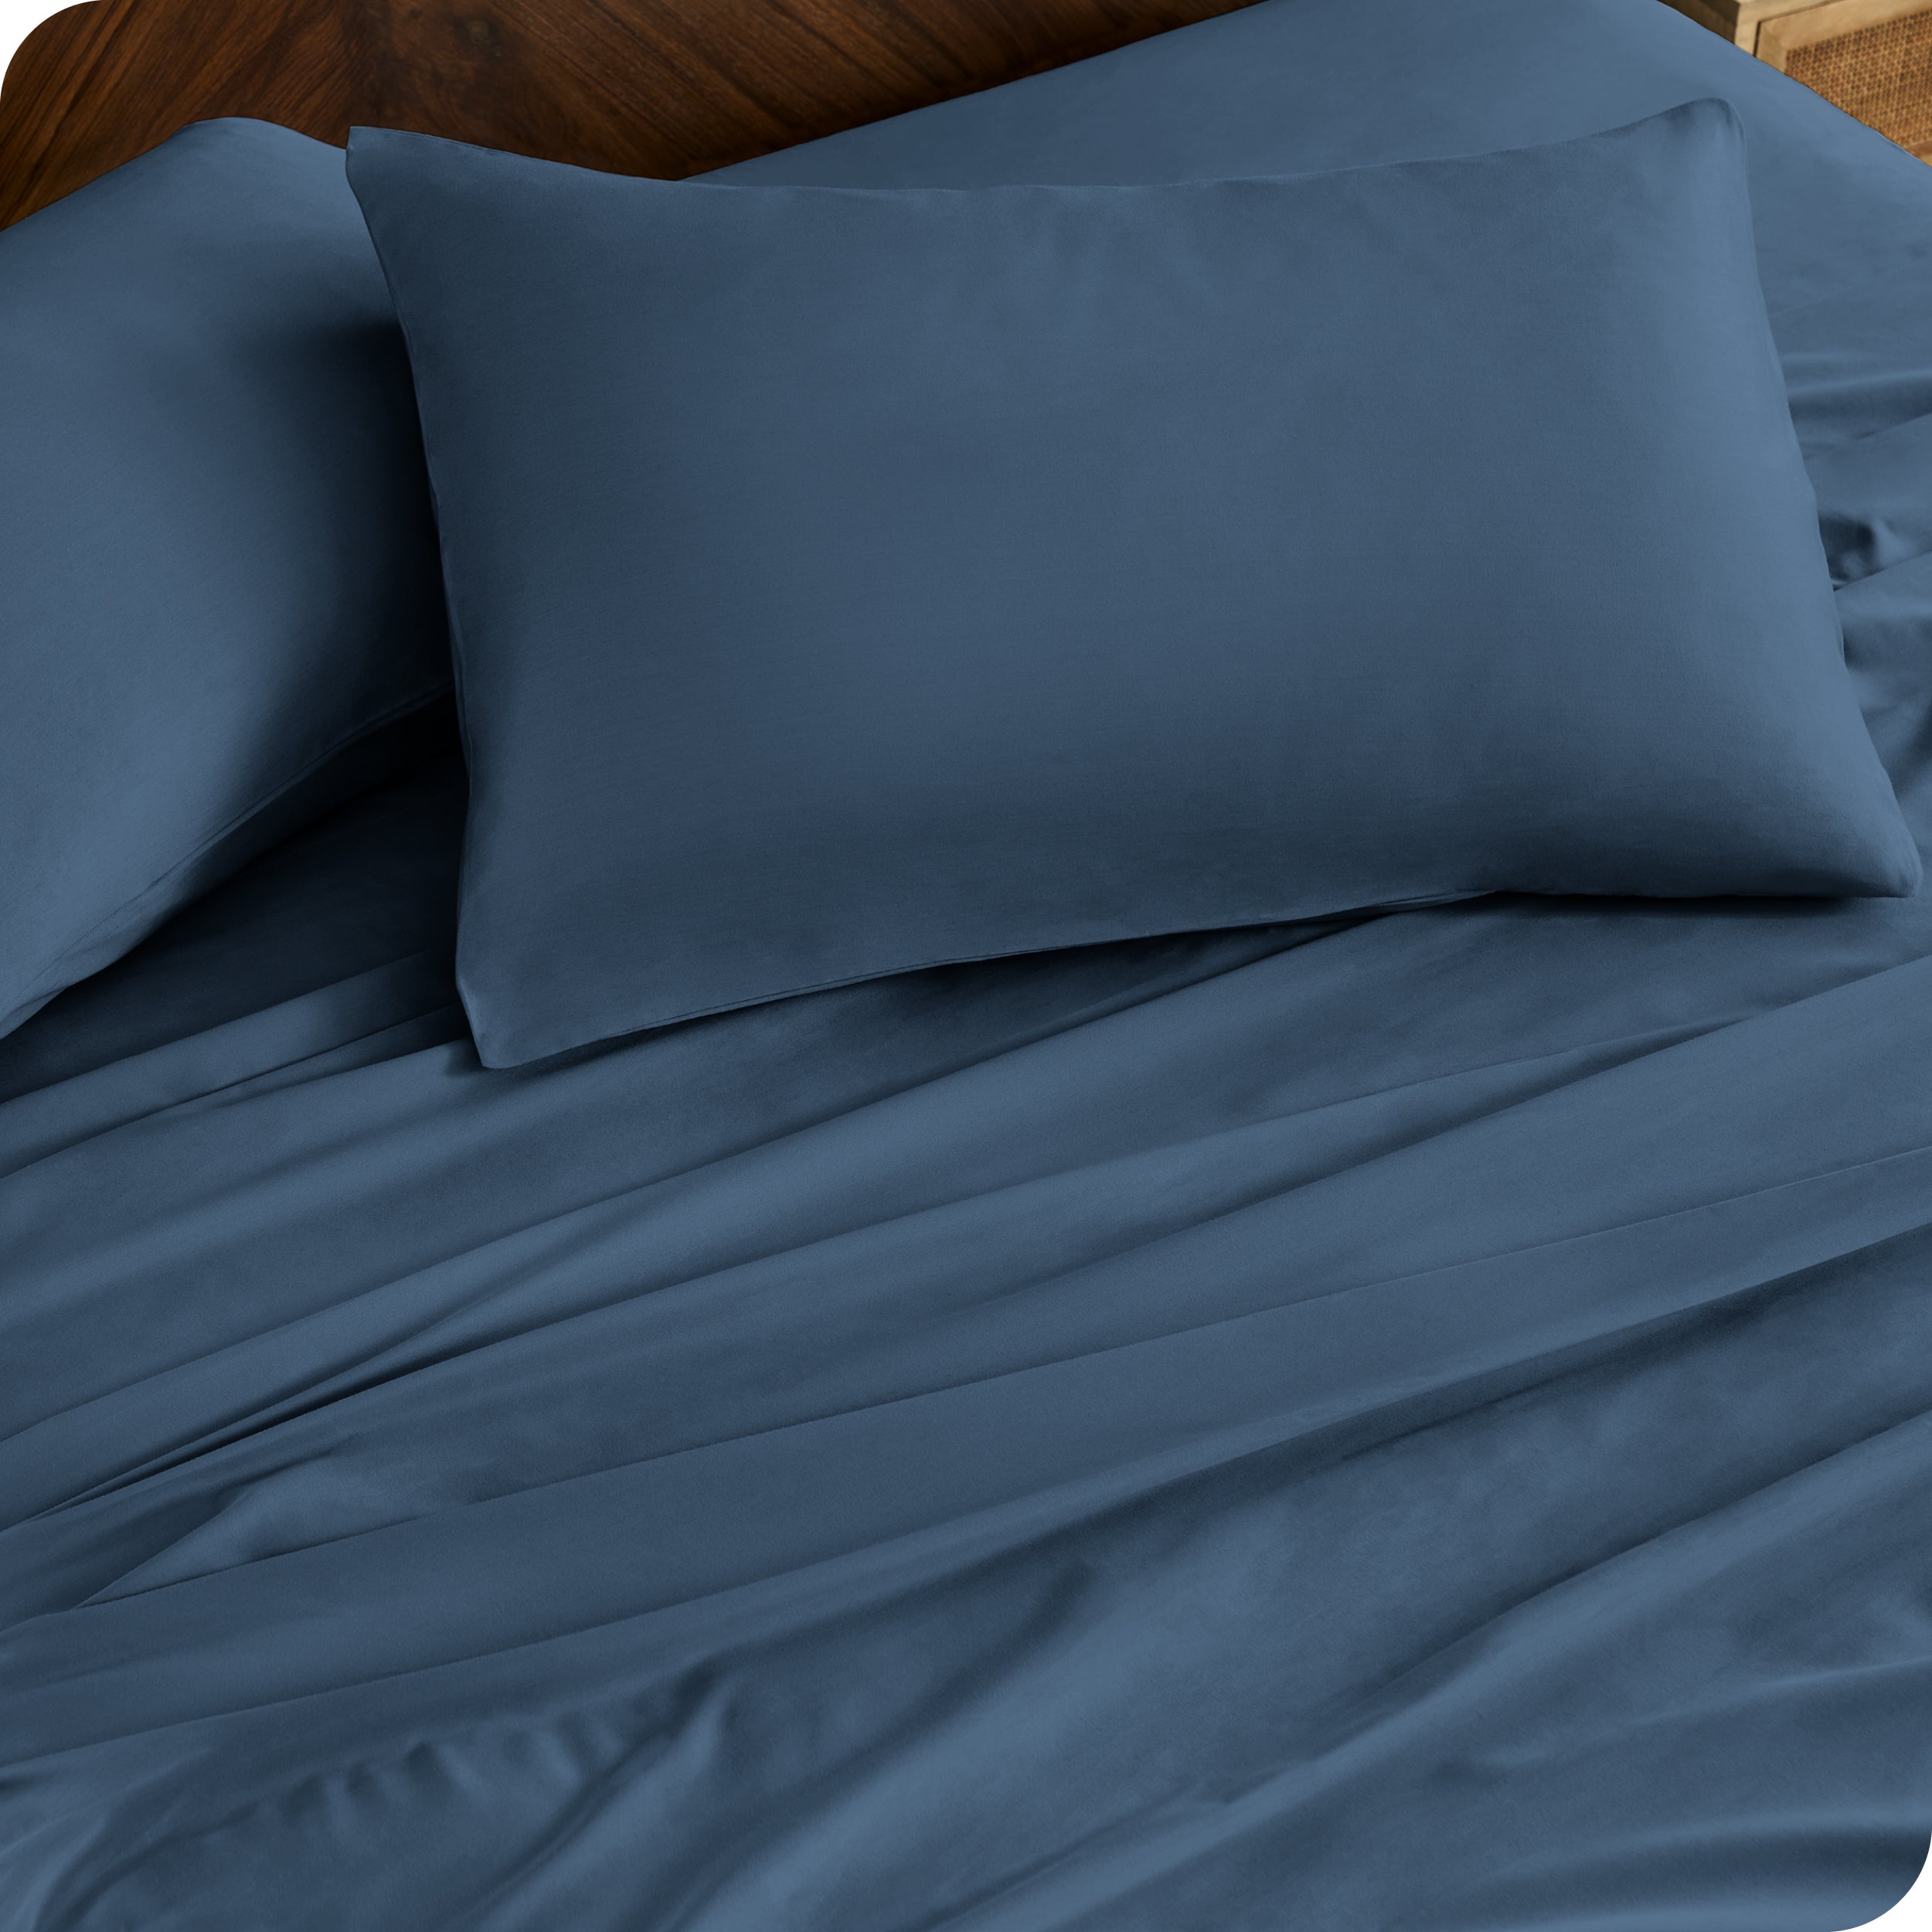 Close up of percale pillowcases and sheets on a bed